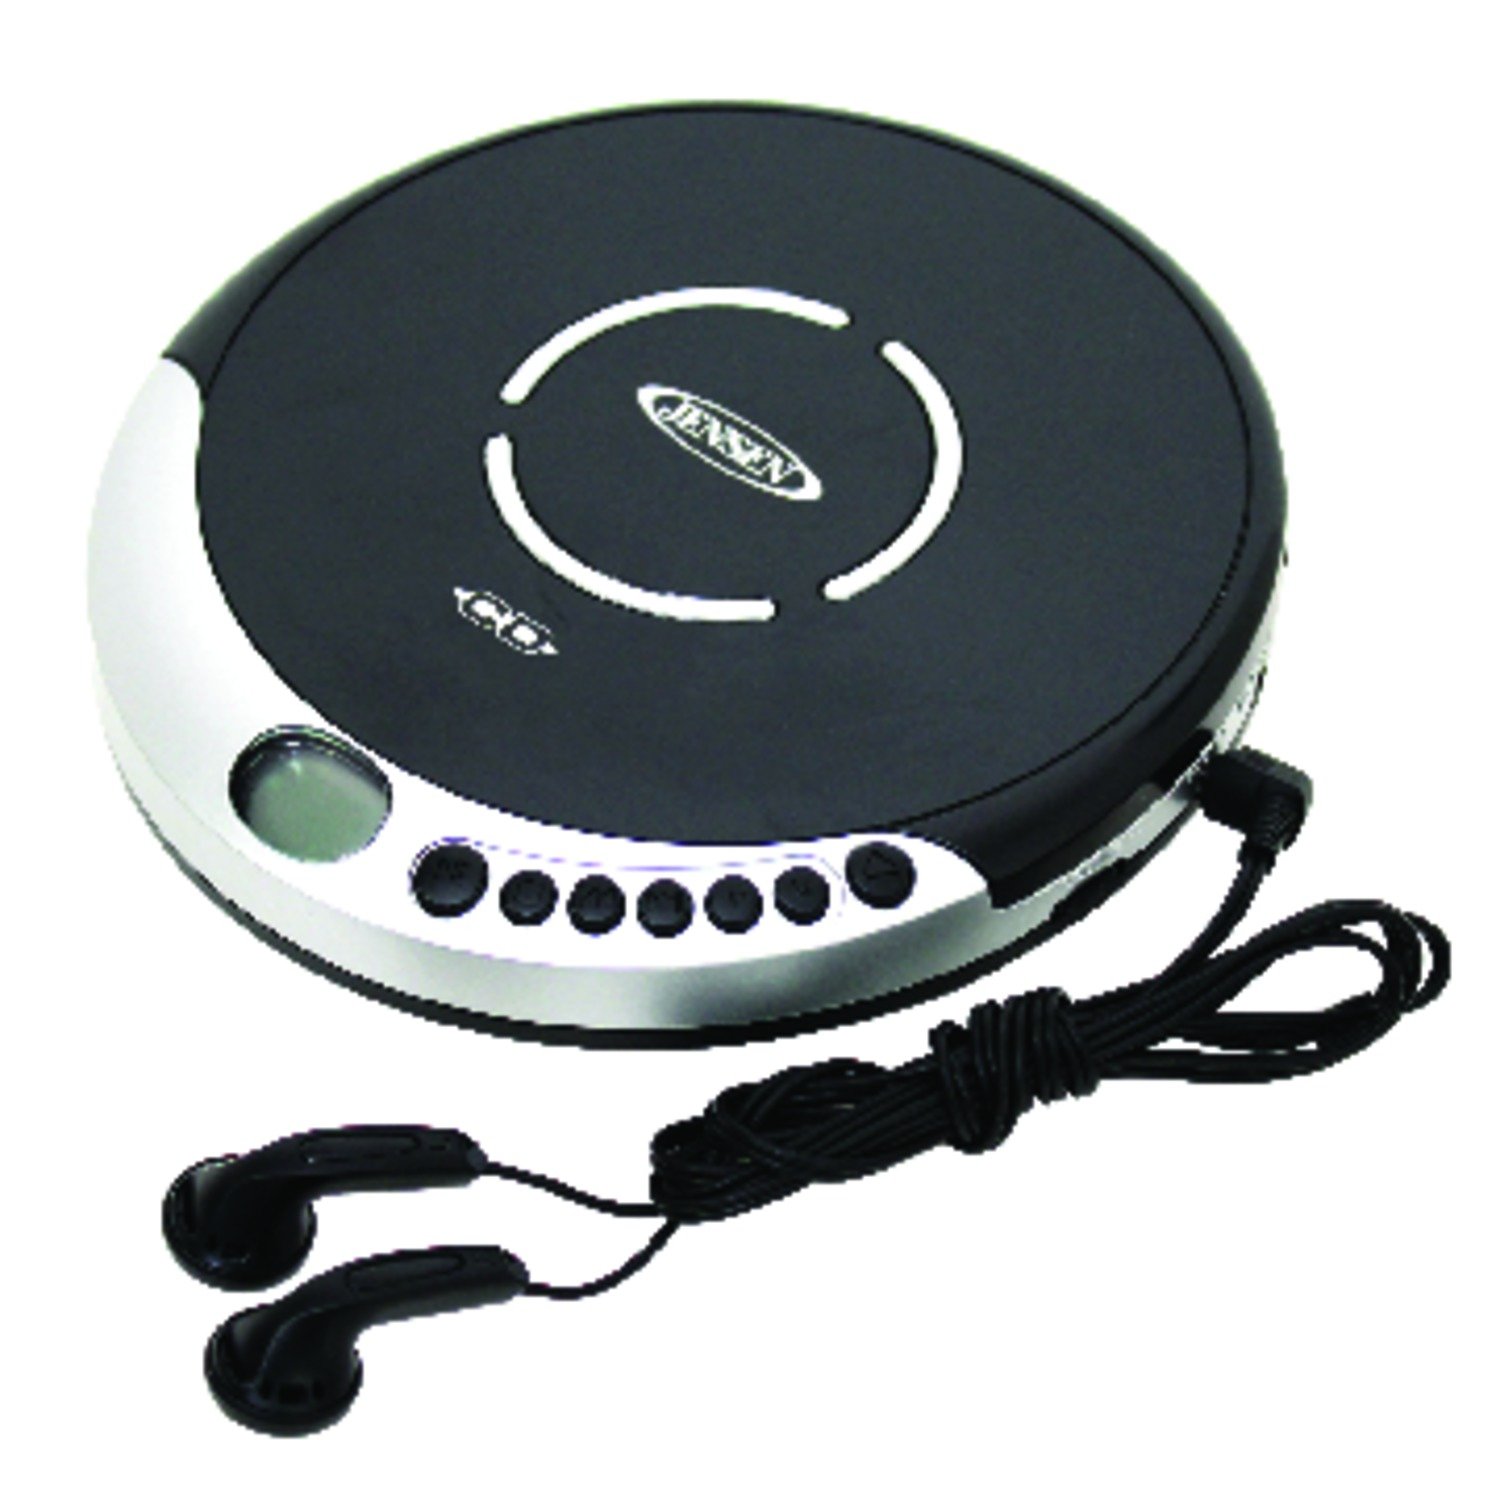 Jensen CD Portable Personal CD Player with 60 Seconds Anti-Skip Protection, FM Radio & Bass Boost + Stereo Earbuds - Black